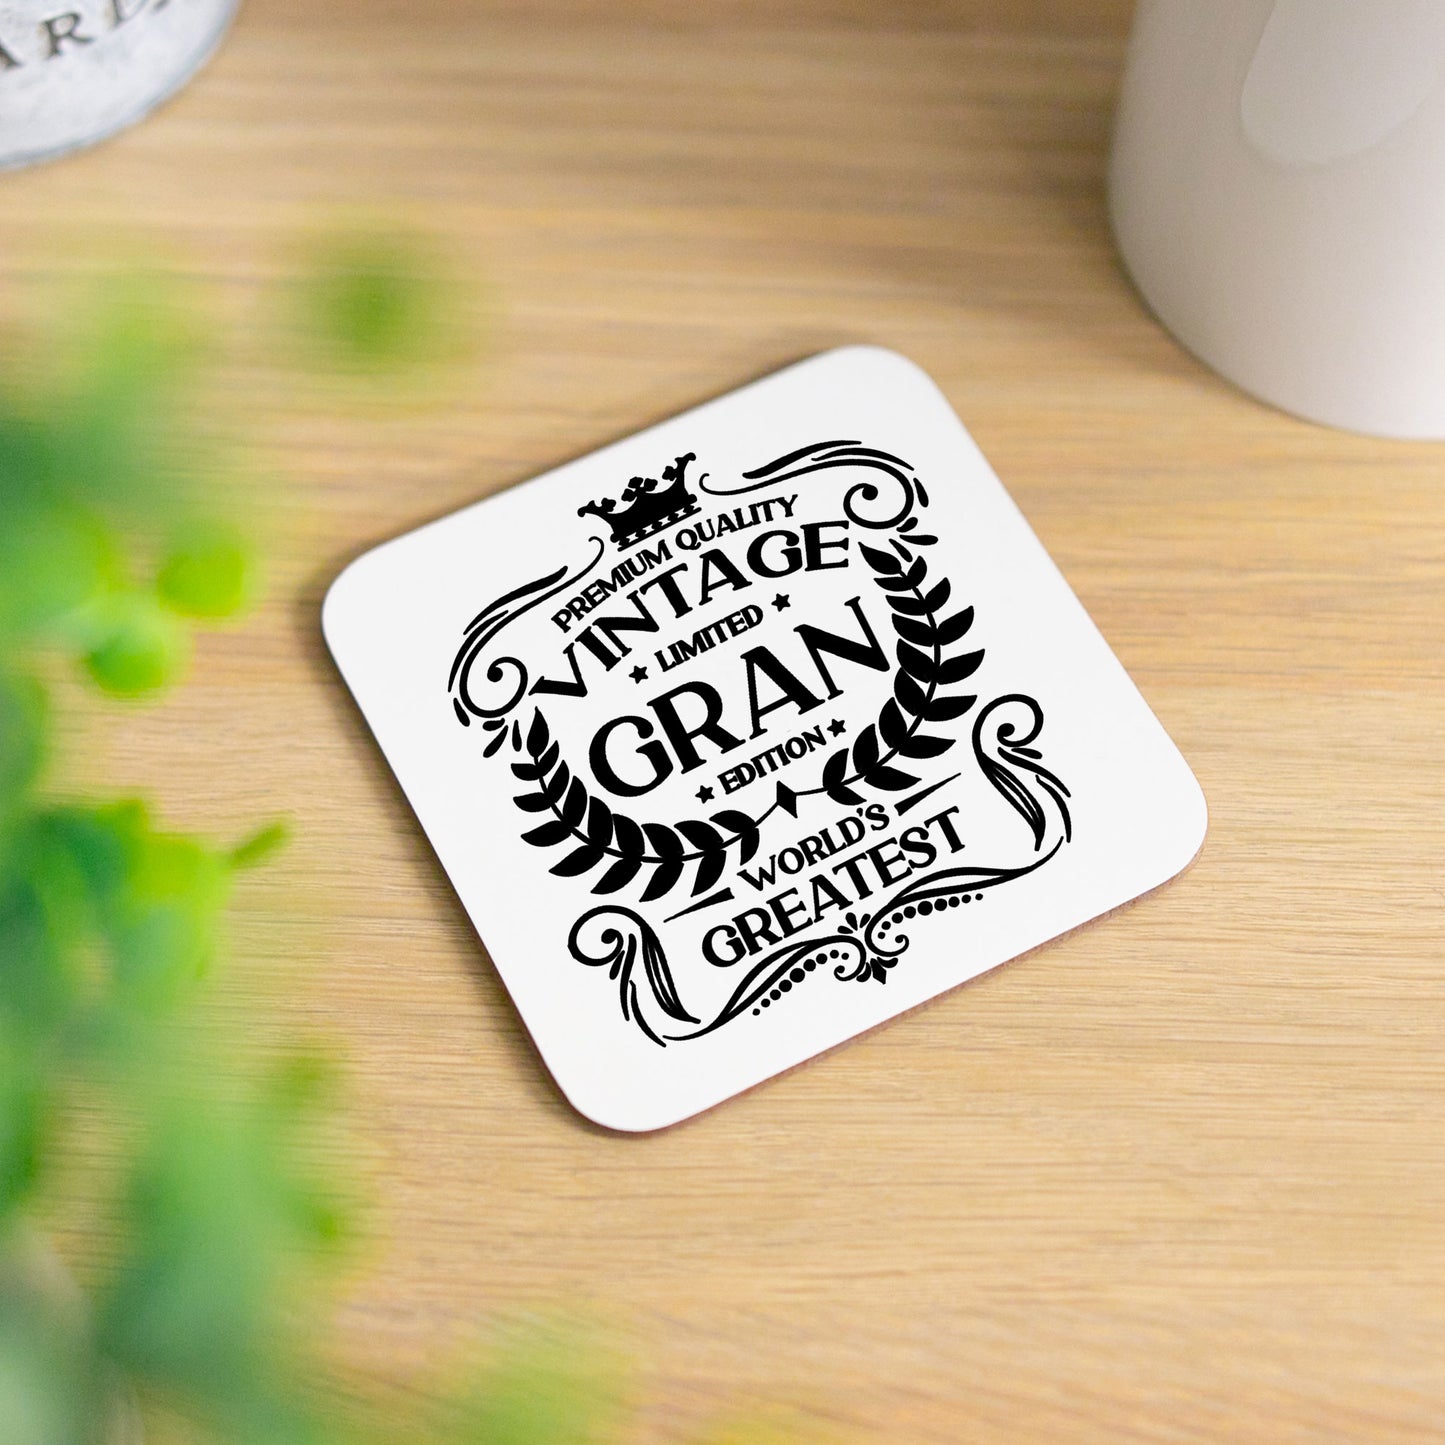 Vintage World's Greatest Gran Engraved Wine Glass Gift  - Always Looking Good - Glass & Printed Coaster  